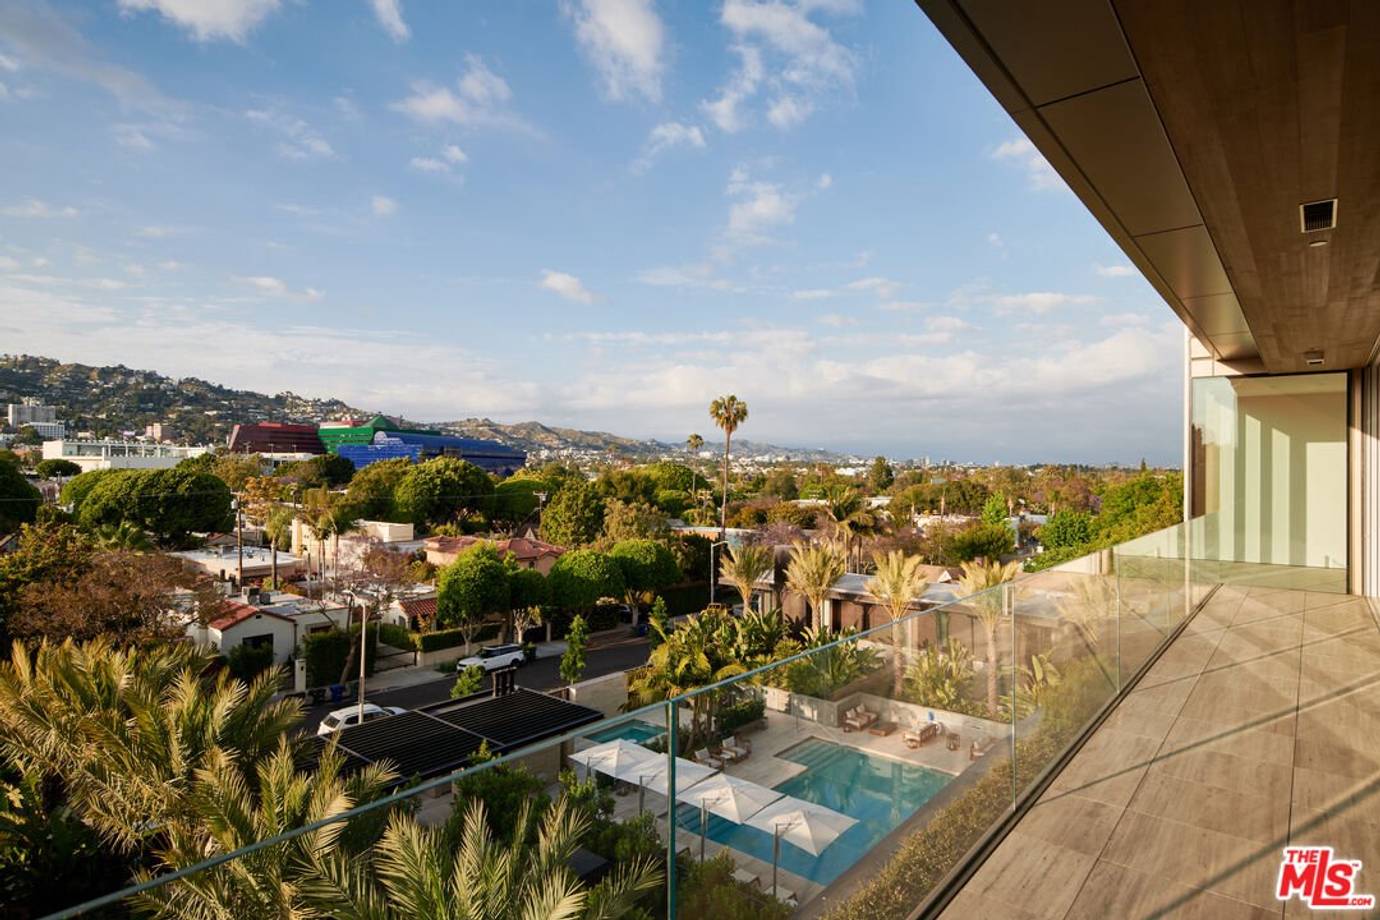 West Hollywood's 8899 Beverly residences are in the home stretch